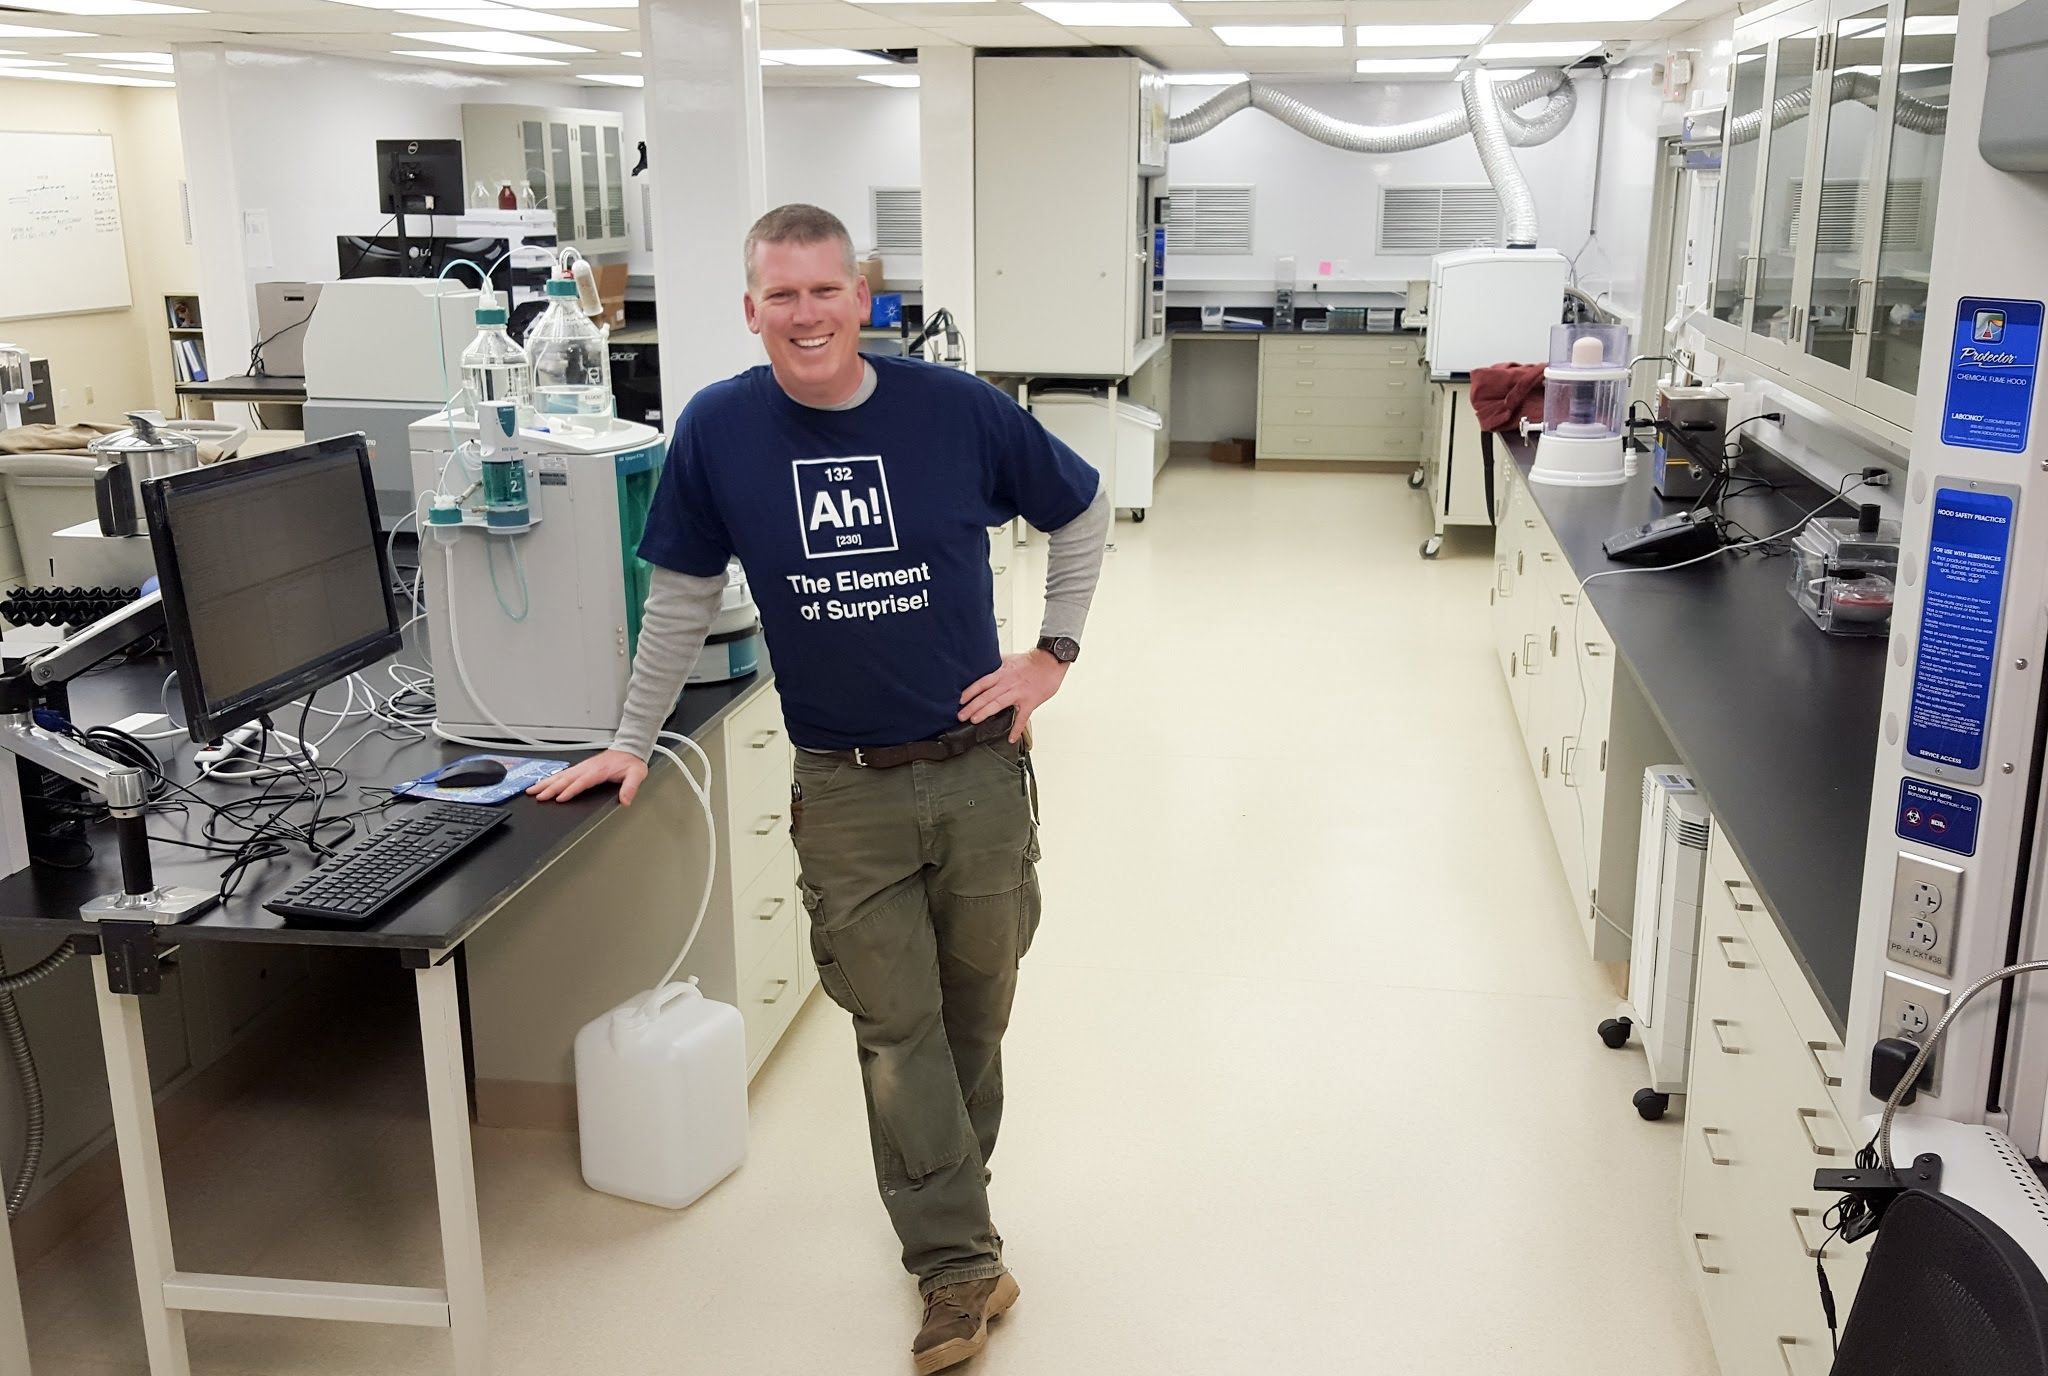 Forensic Food Scientist Mike Adams Launches Non-profit Testing Initiative to Test Every U.S. City’s Water Supply